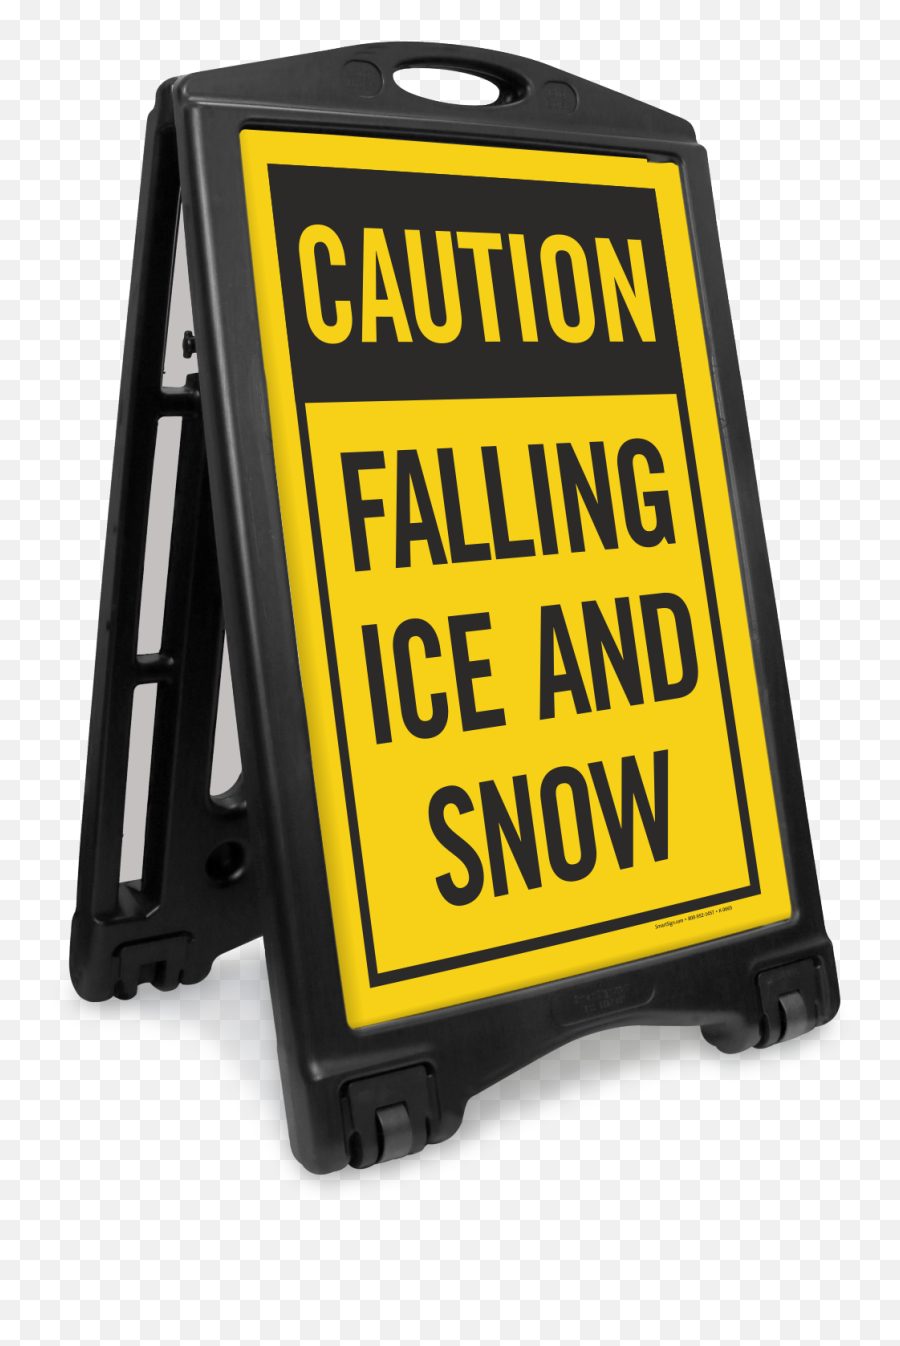 Falling Ice And Snow Sidewalk Sign Sku K - Roll1075 Caution Under Construction Png,Transparent Snow Falling